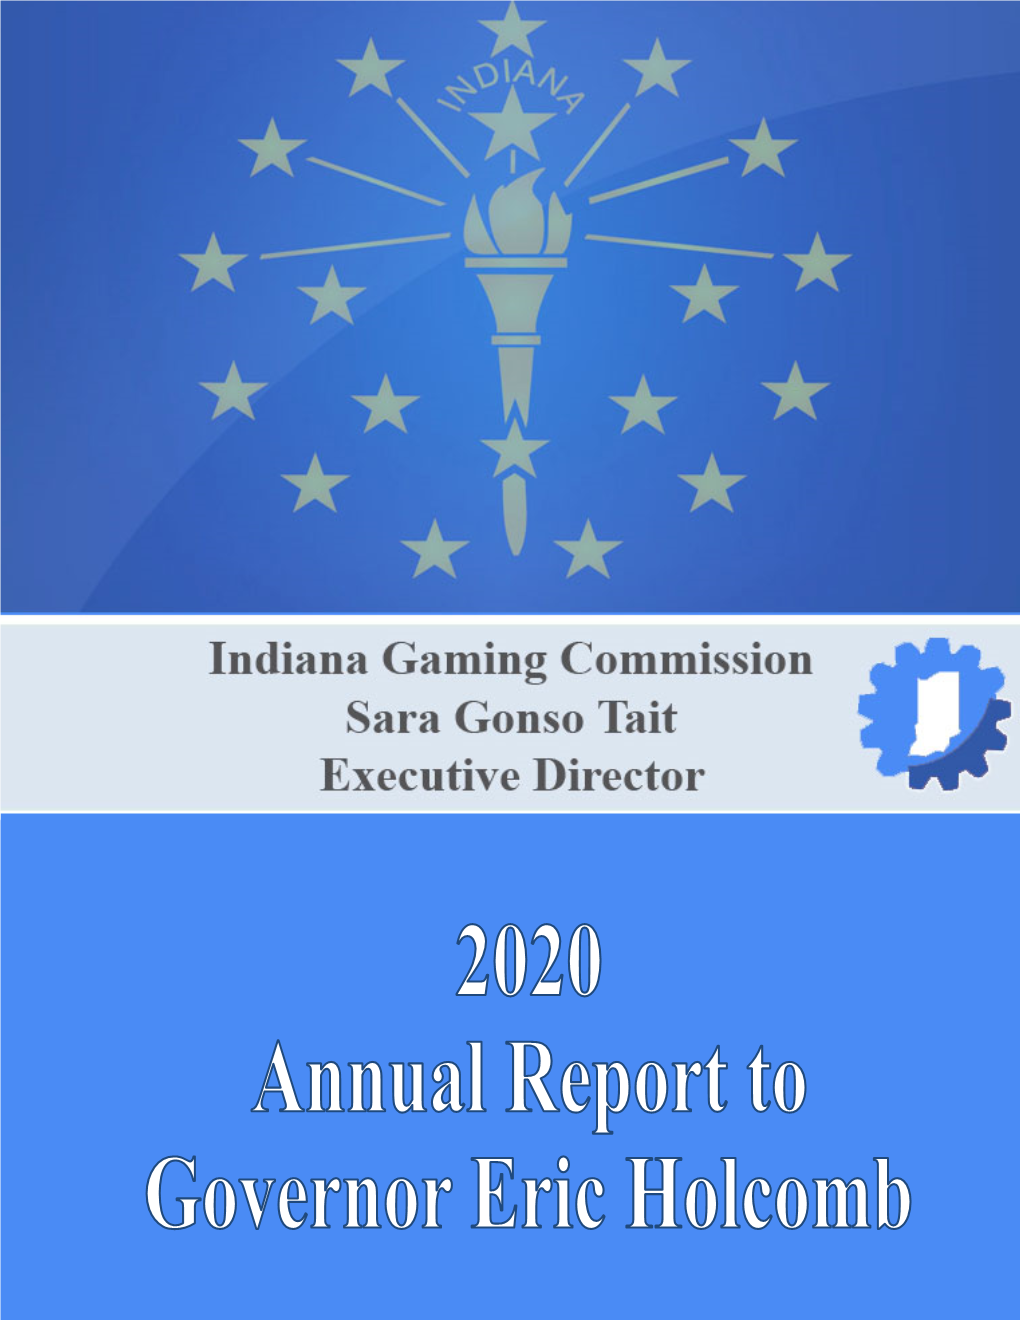 FY 2020 Annual Report